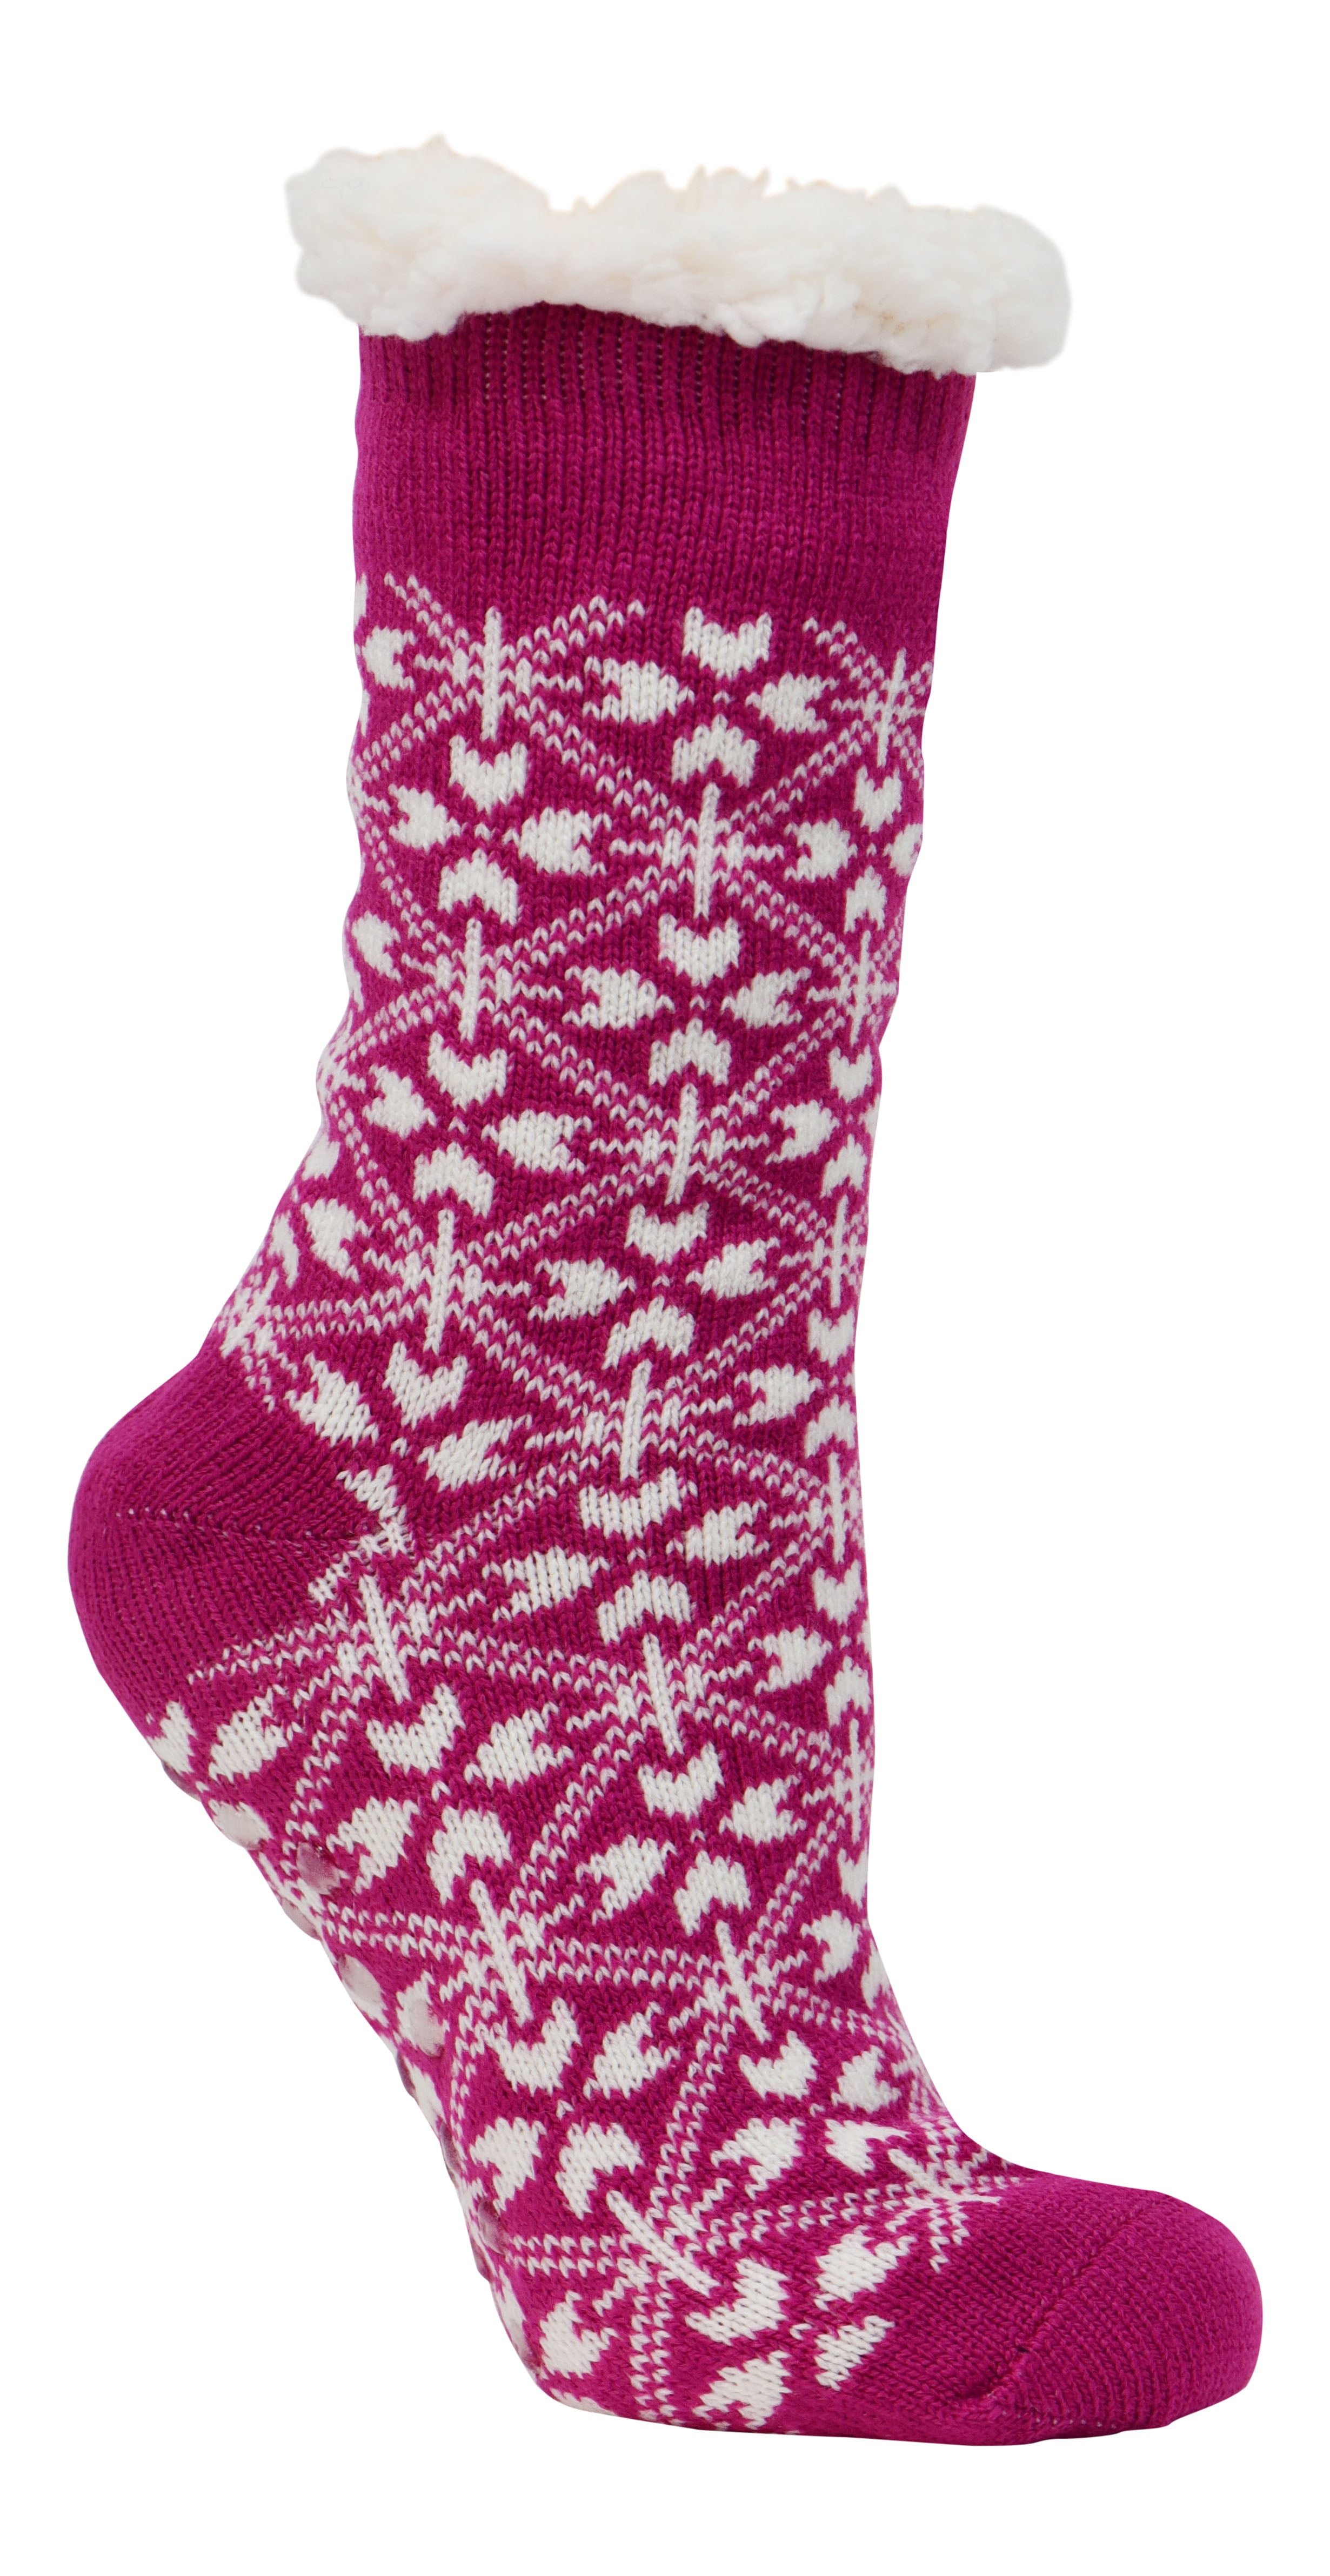 Women Socks Mid-Calf Lavender Fabric With Floral Pattern Winter Warmth Vintage For Gift